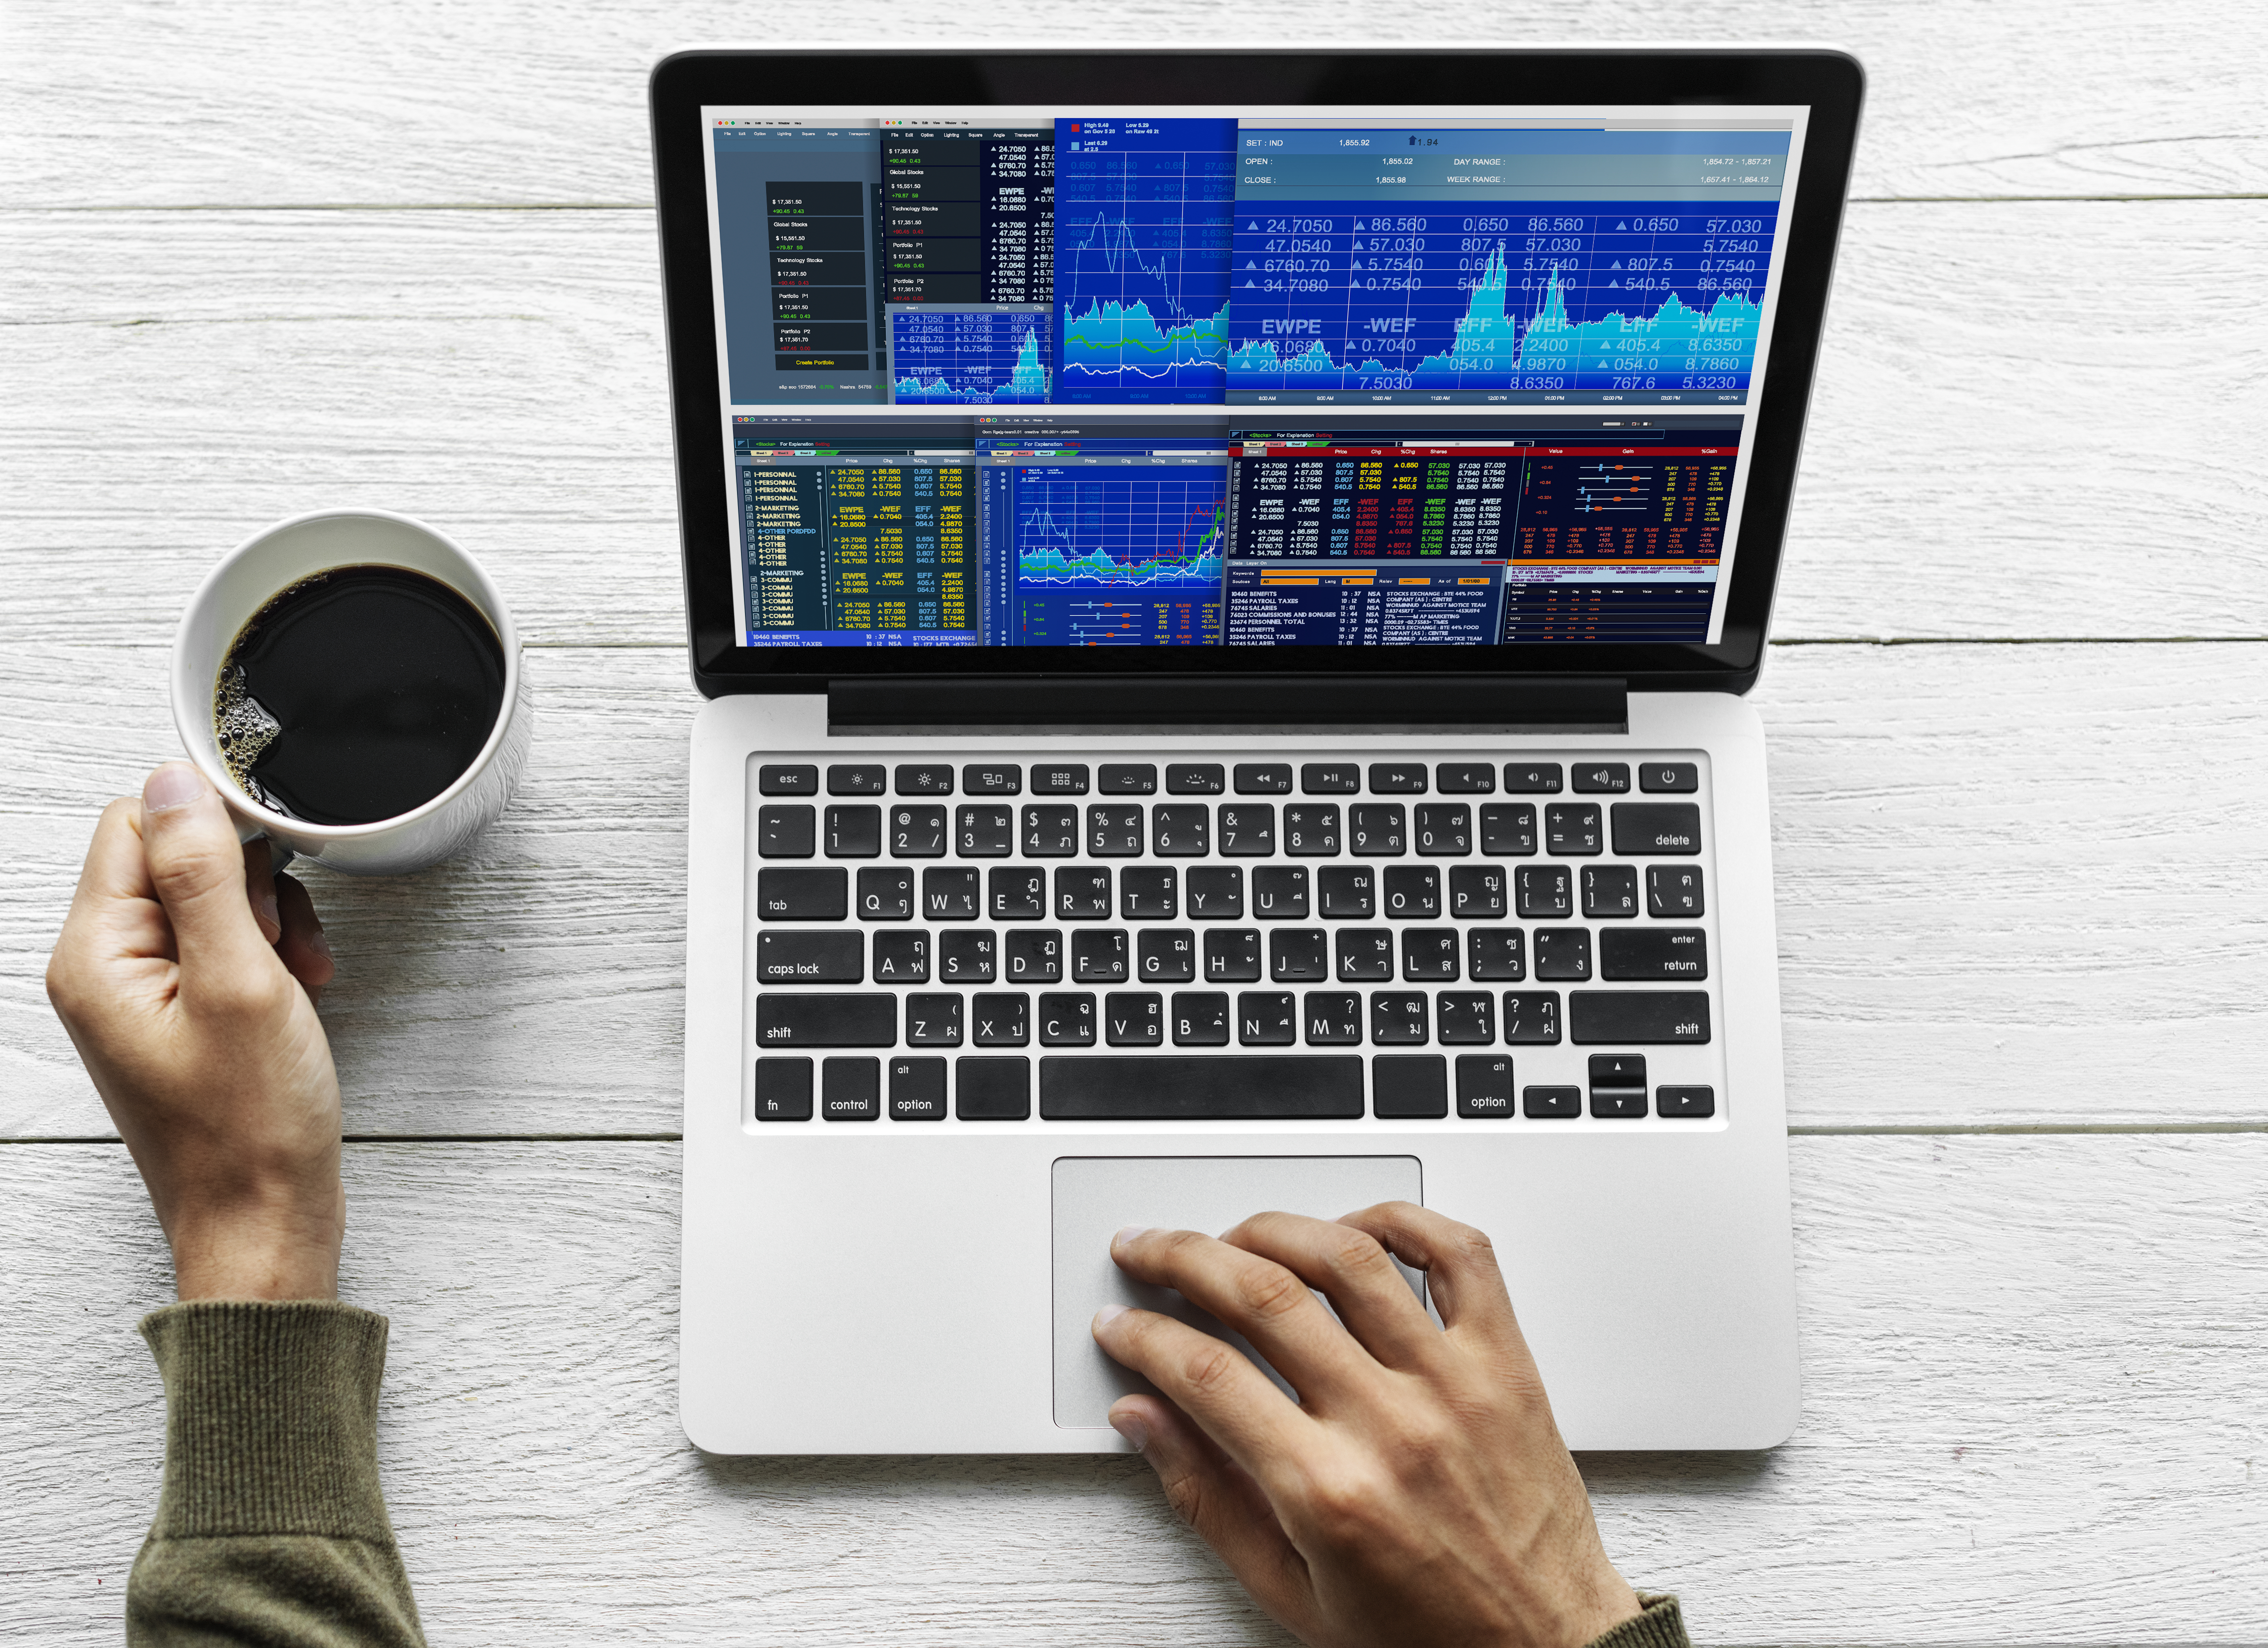 A man uses stock trading app on a grey Macbook Pro while drinking coffee on the table